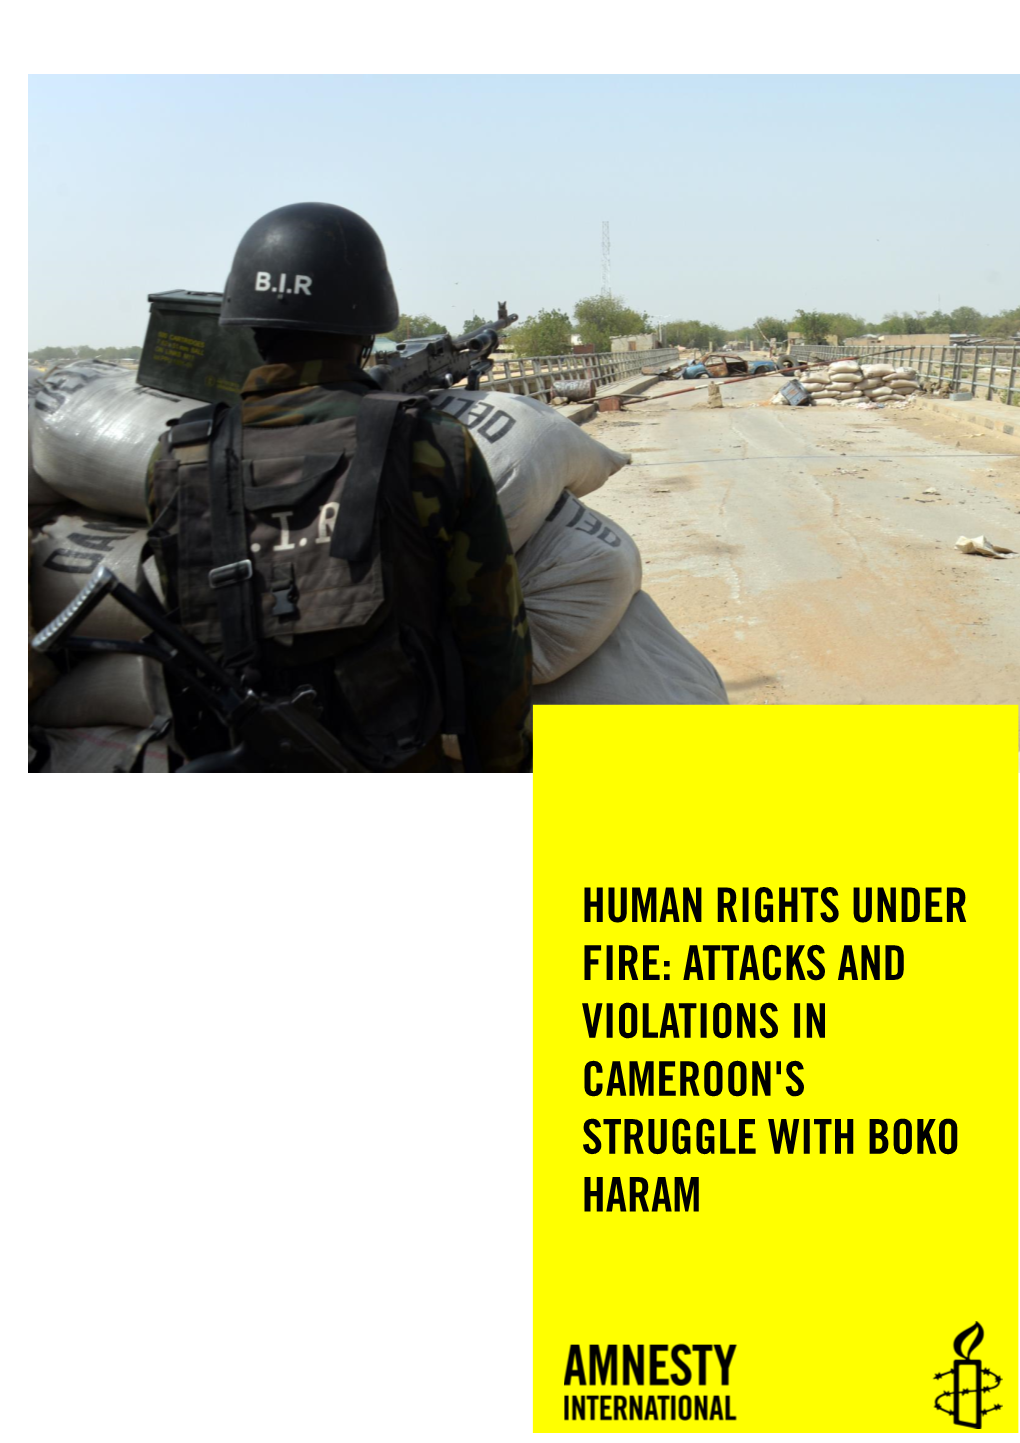 Human Rights Under Fire:Attacks and Violations in Cameroon's Struggle